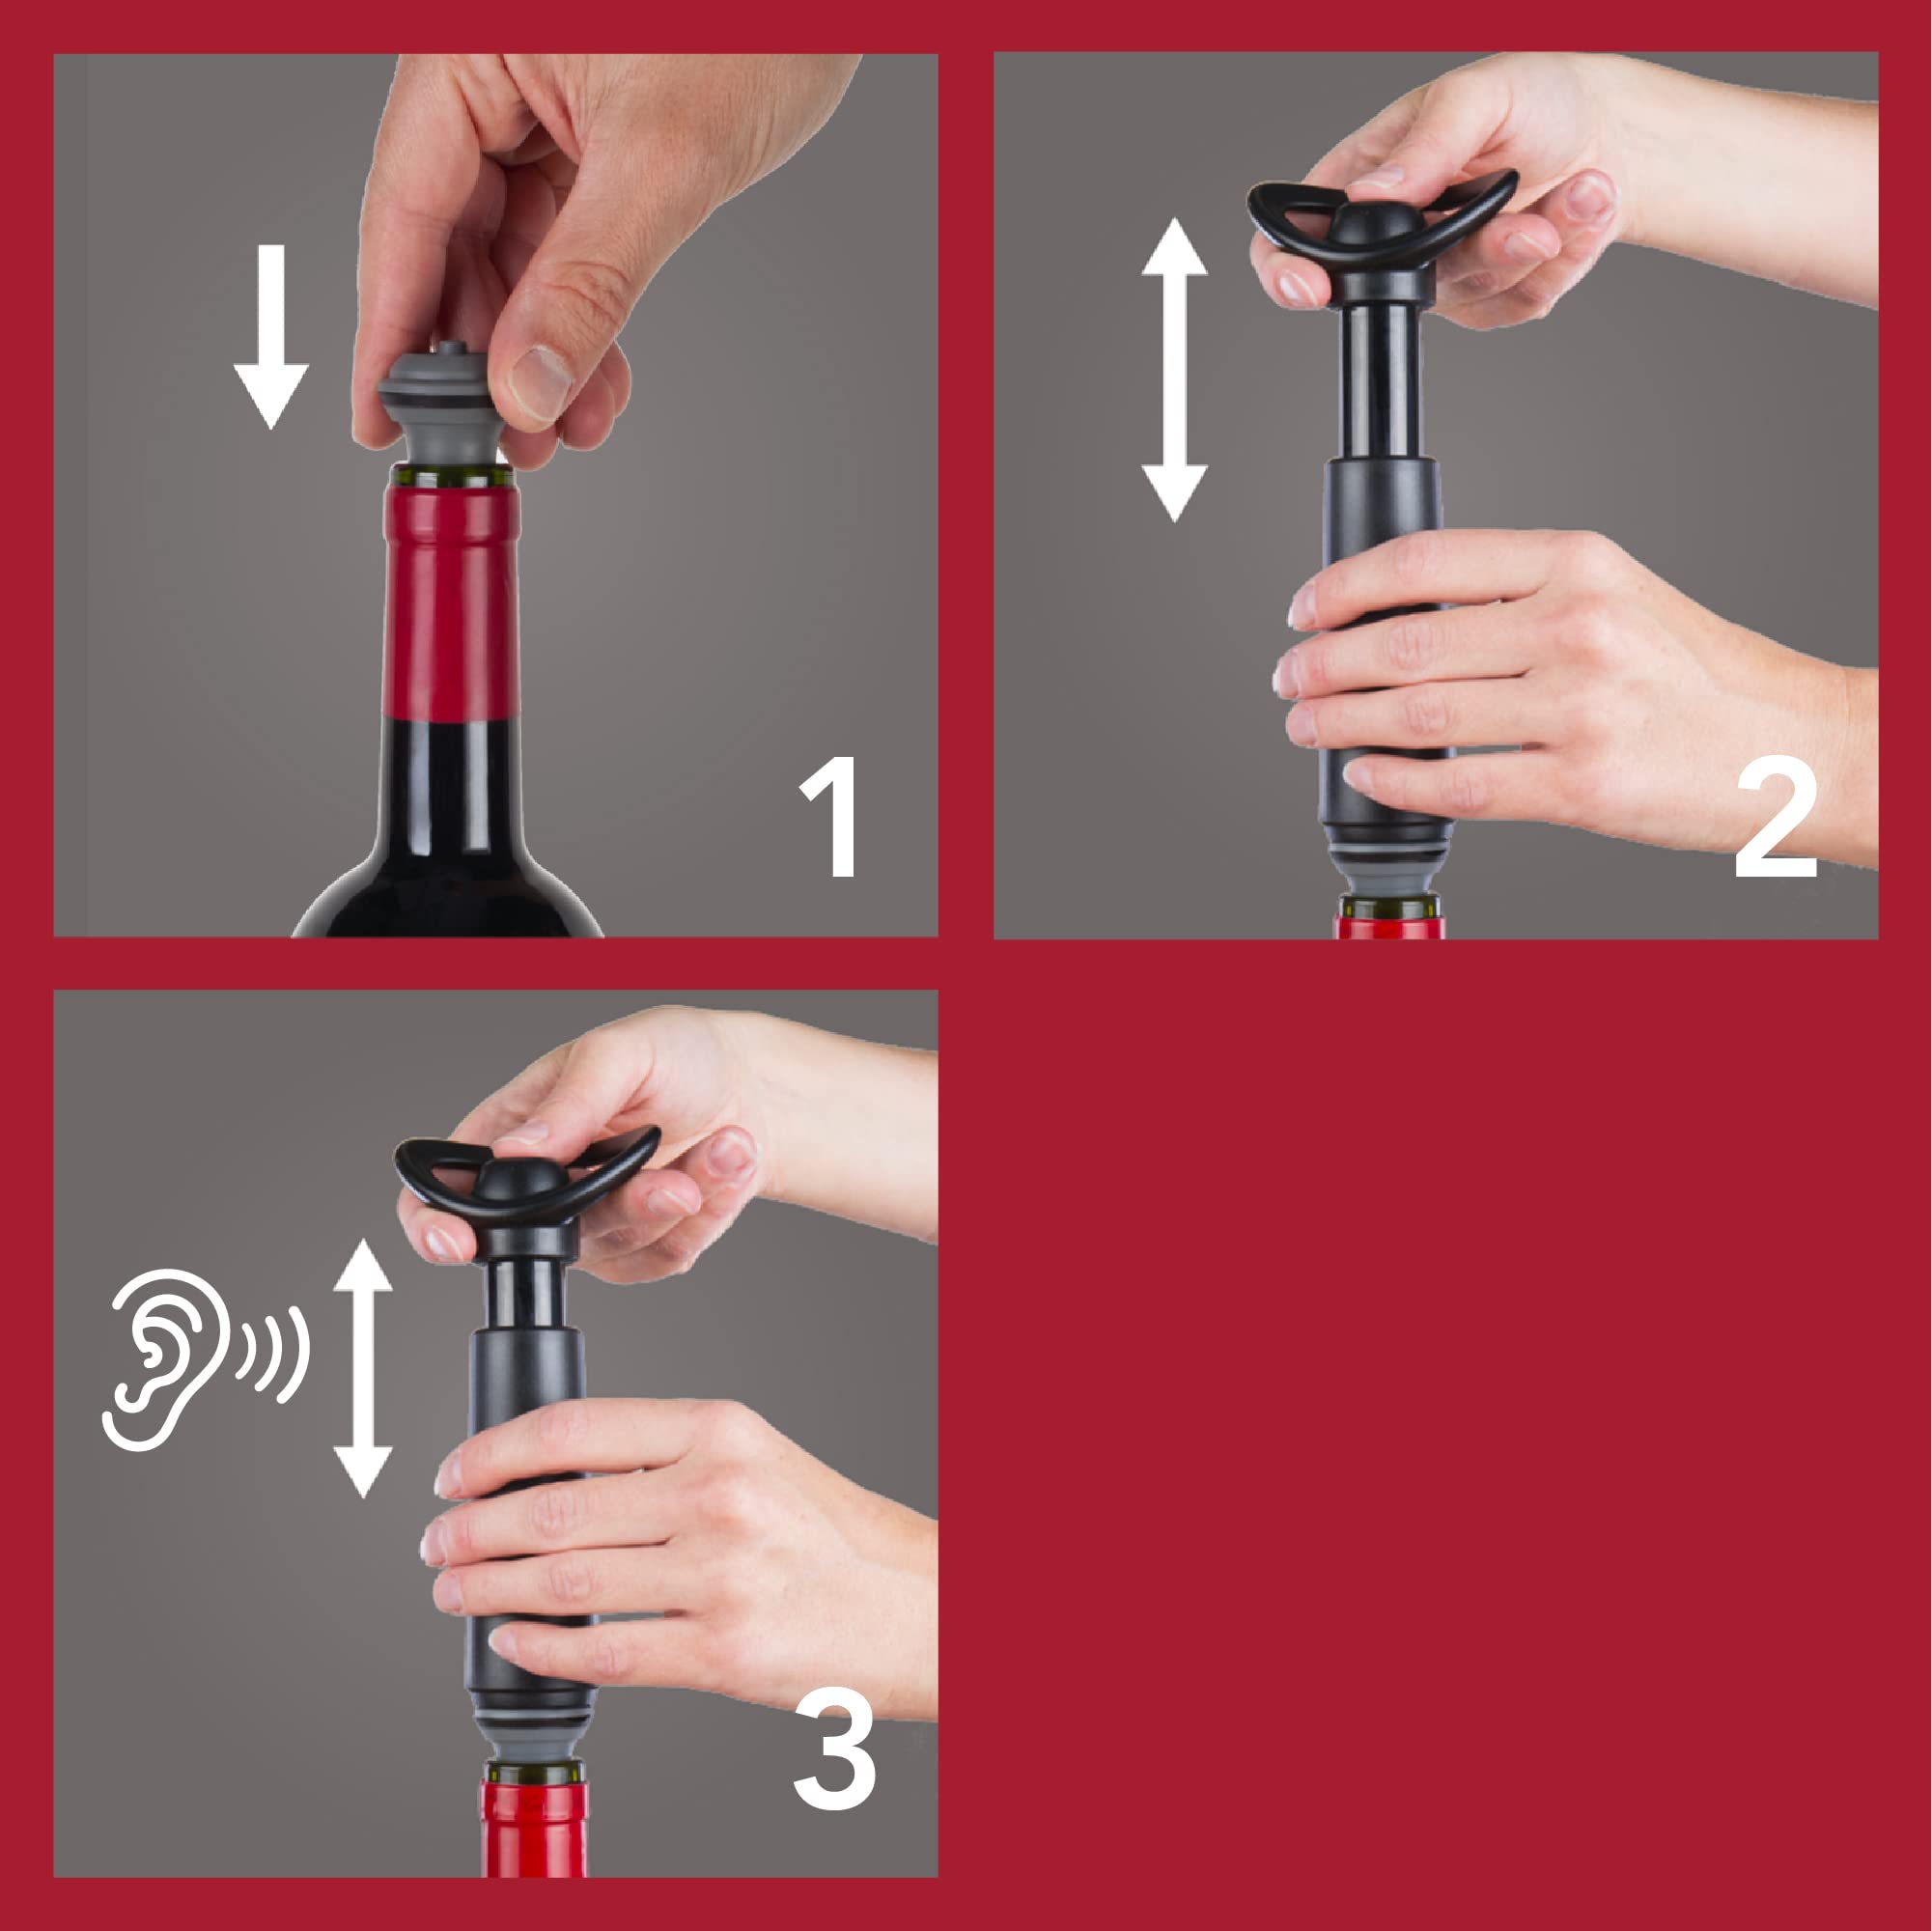 Vacu Vin Wine Saver Concerto - Black - 1 Pump 2 Stoppers - Wine Stoppers for Bottles with Vacuum Pump and Pourer - Reusable - Made in the Netherlands